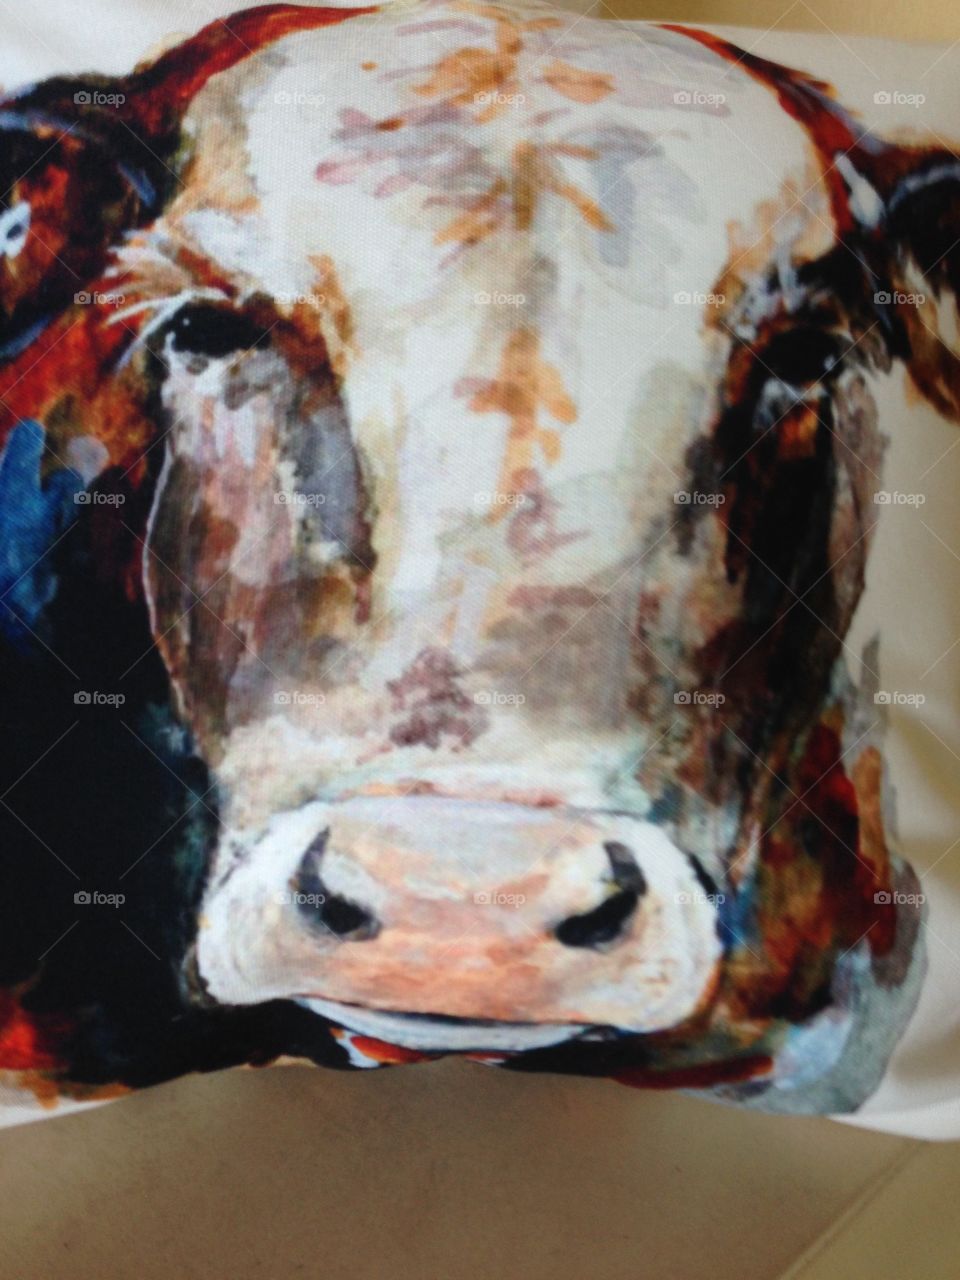 A cow in a really colorful way.  A sweet face that I wish I had painted.